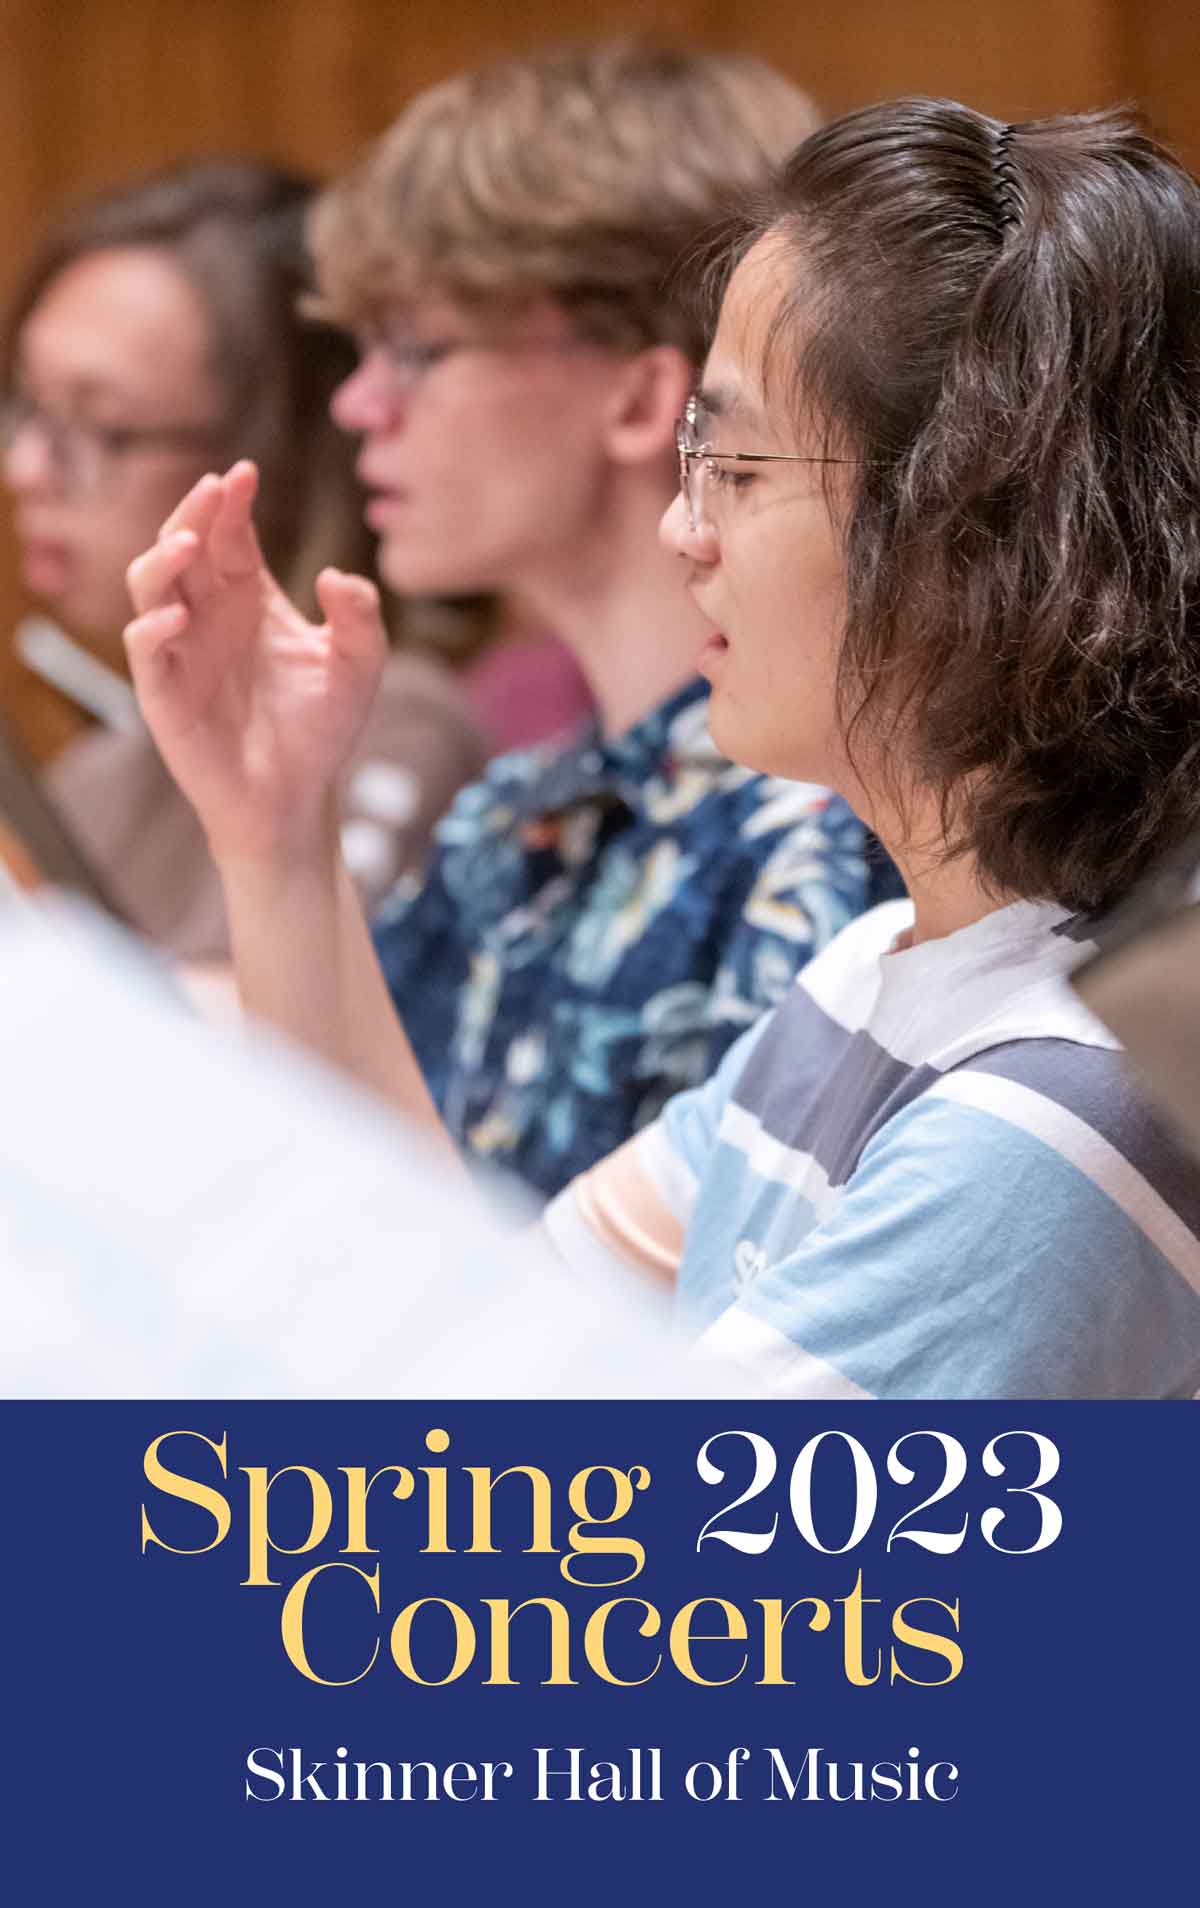 Image of singers in a choir with text below that reads Spring 2023 Concerts, Skinner Hall of Music